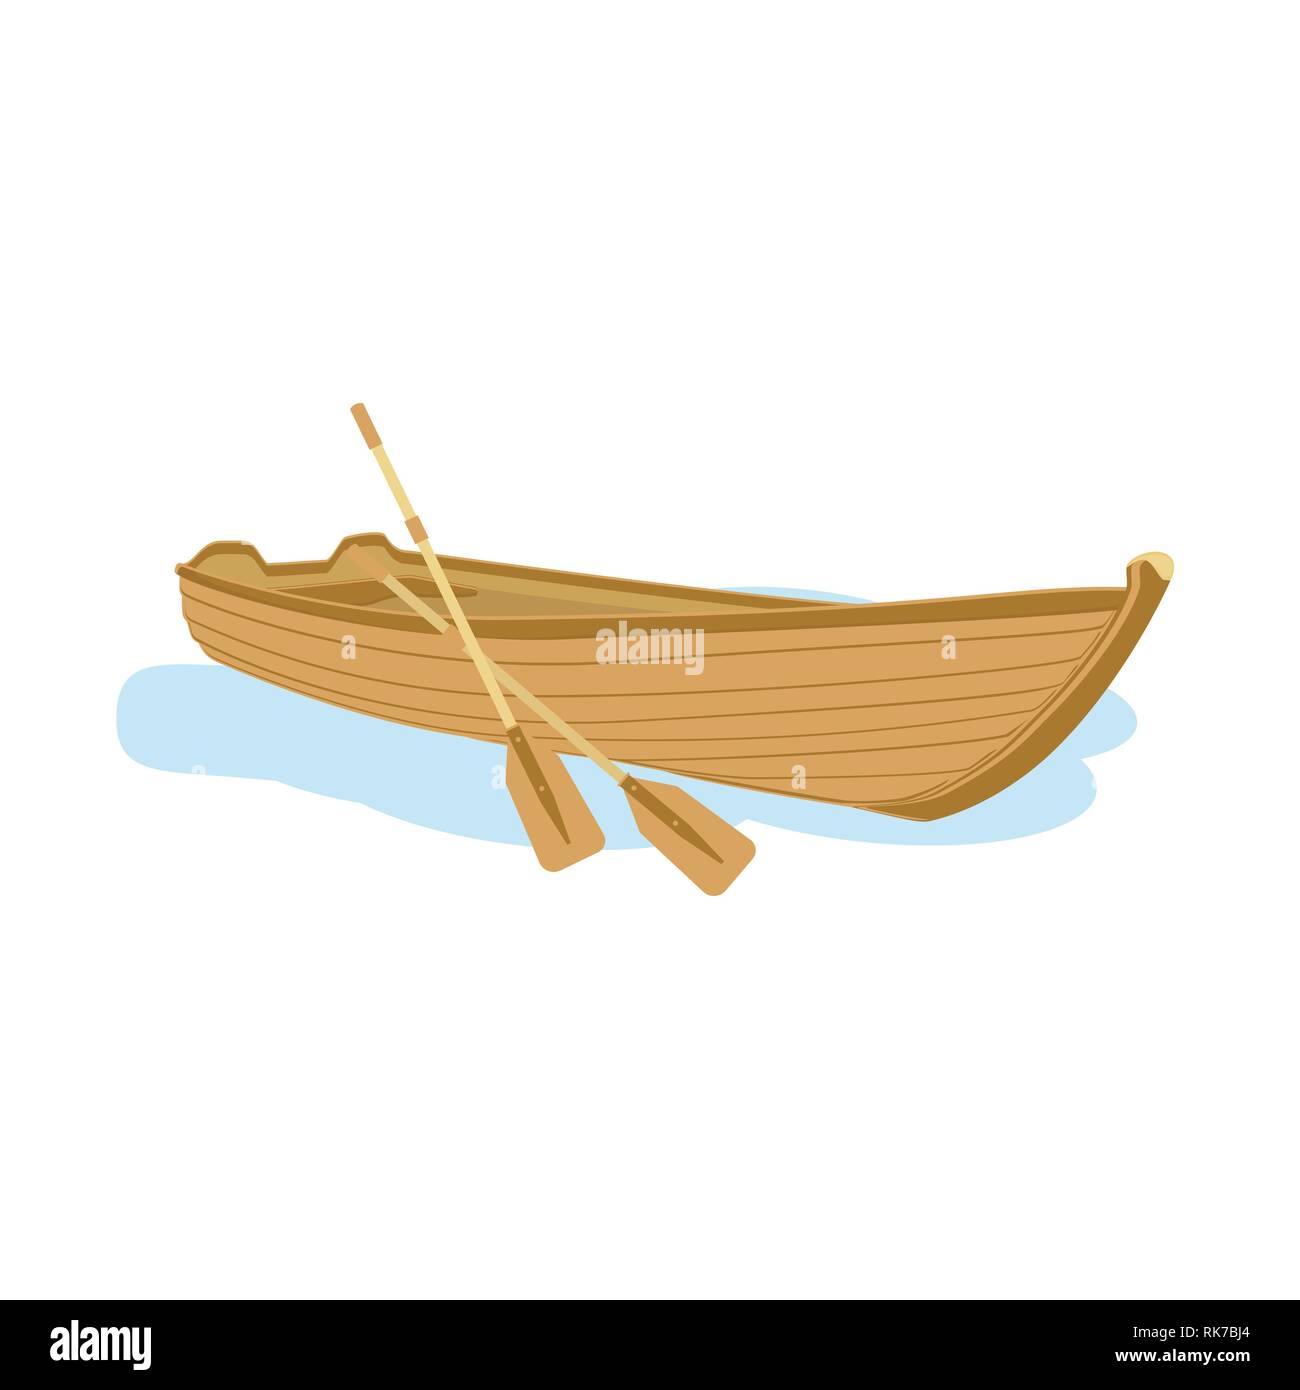 Wooden boat with oars vector illustration isolated on white. Stock Vector